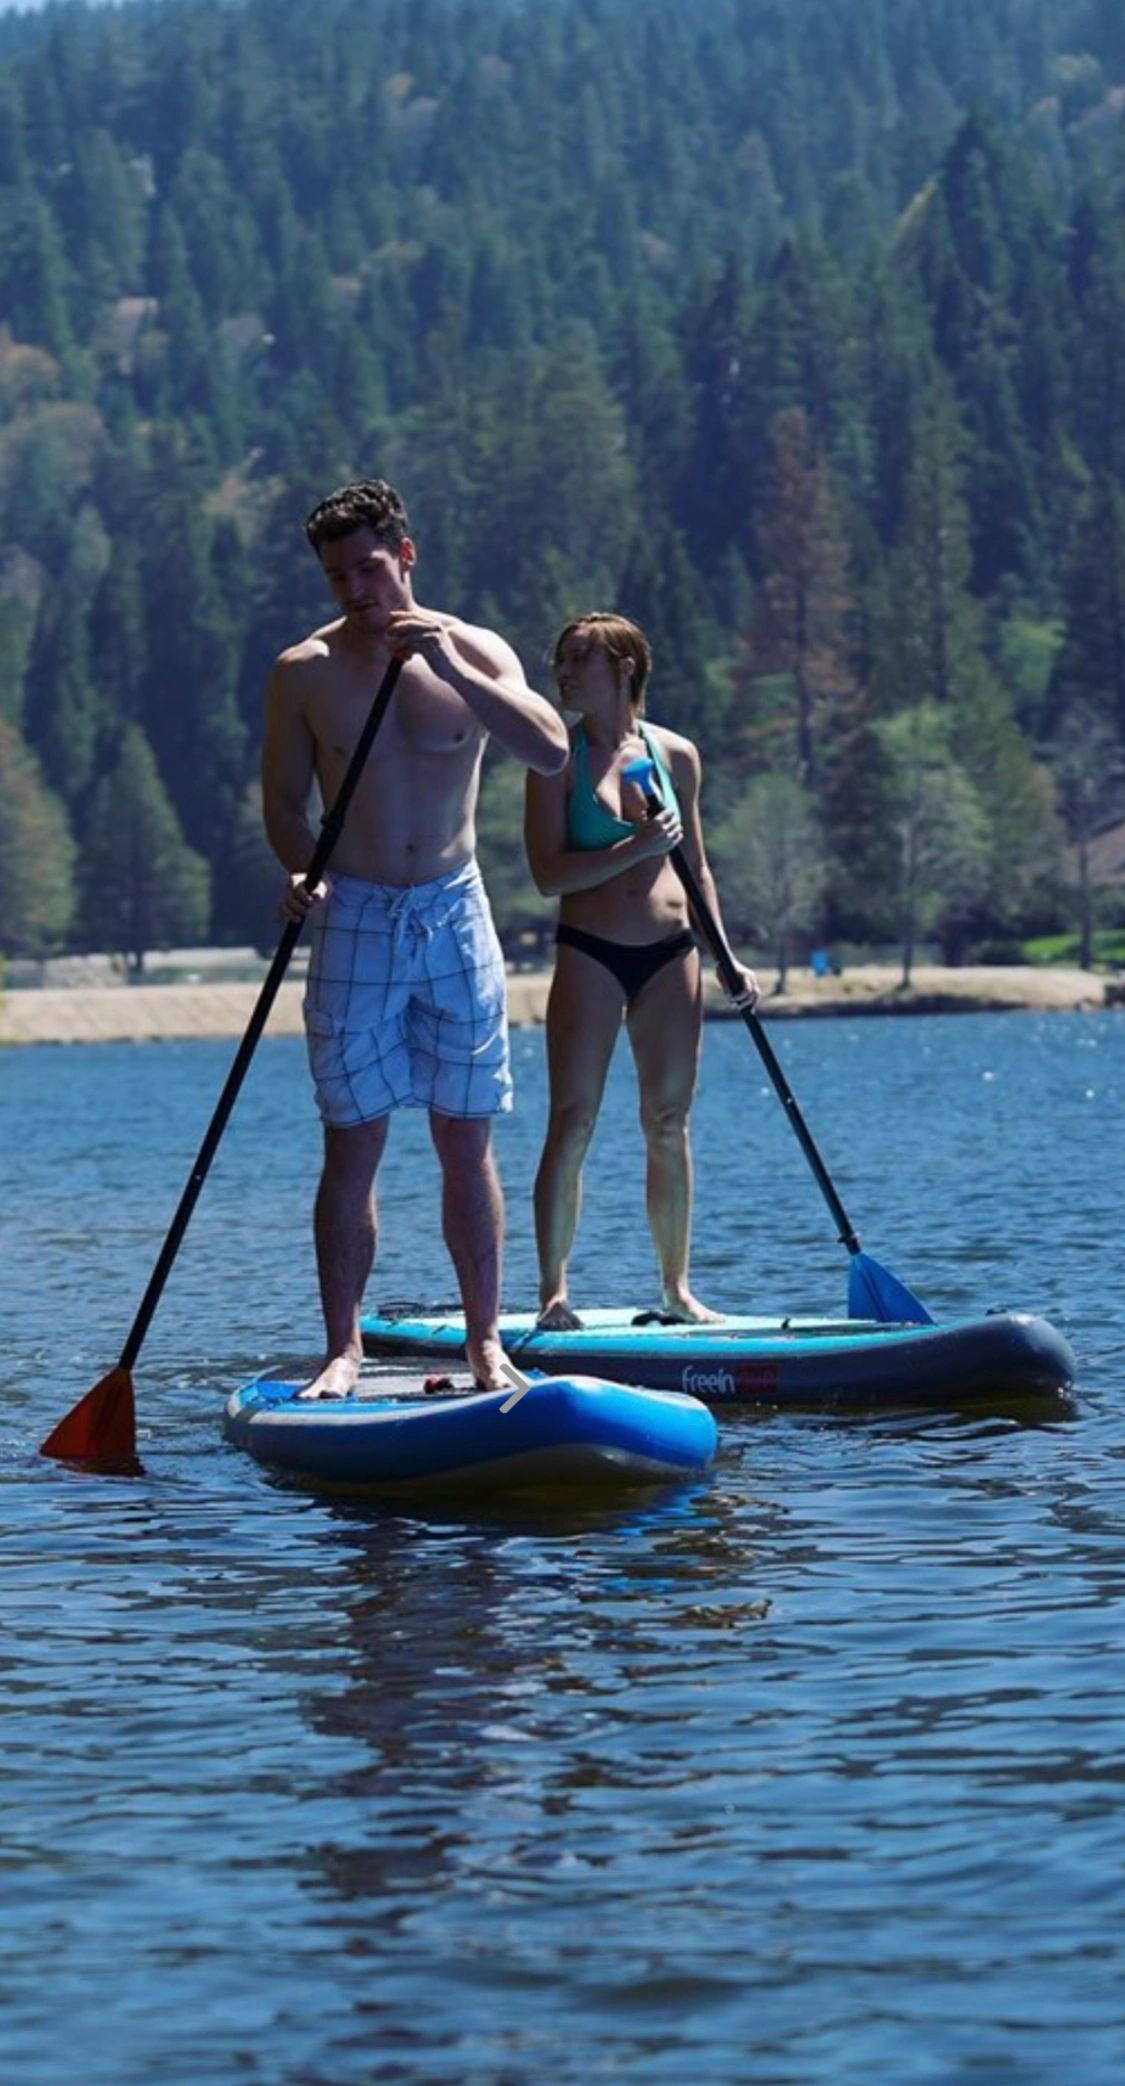 Paddle board best offers.